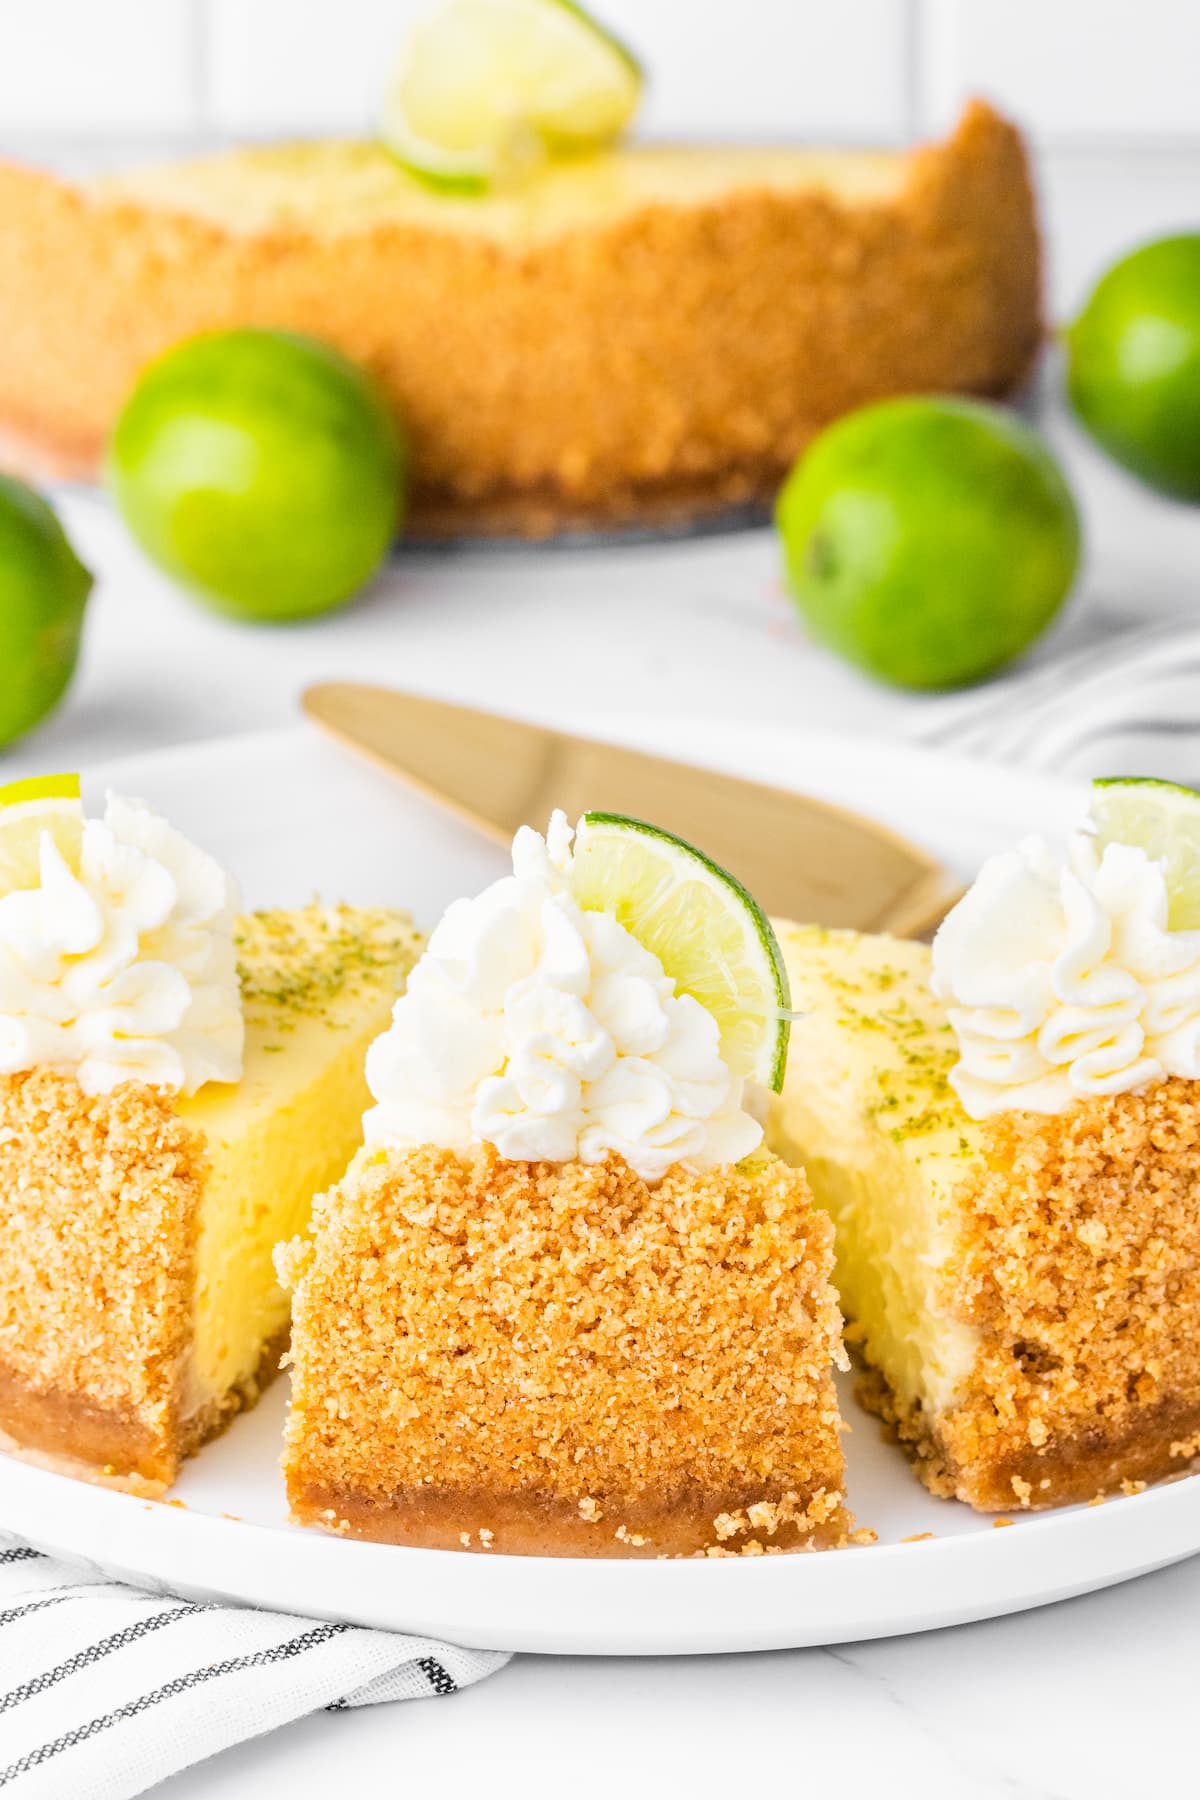 slices of key lime cheesecake on a white plate with whipped cream dollop and a slice of key lime on top